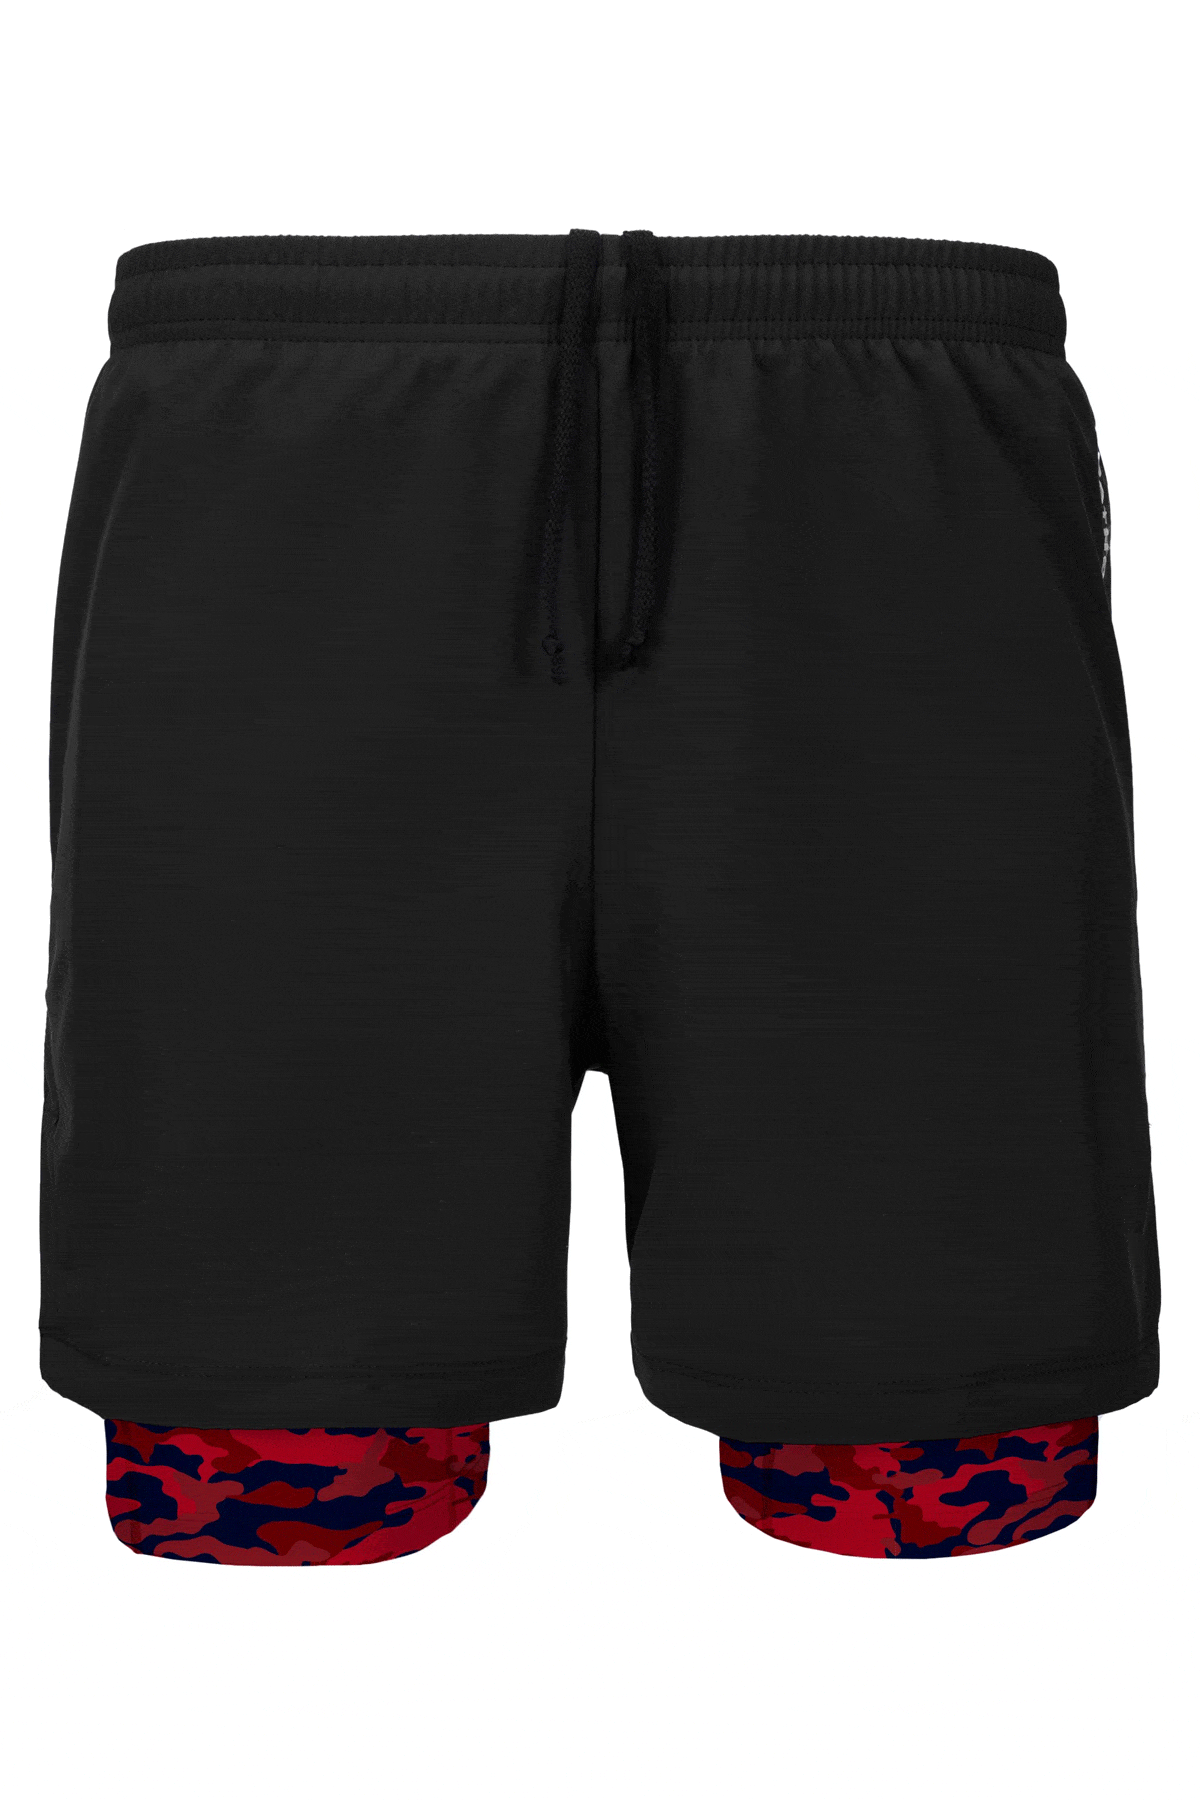 Buy Active Black Double Layer Running Shorts - 14